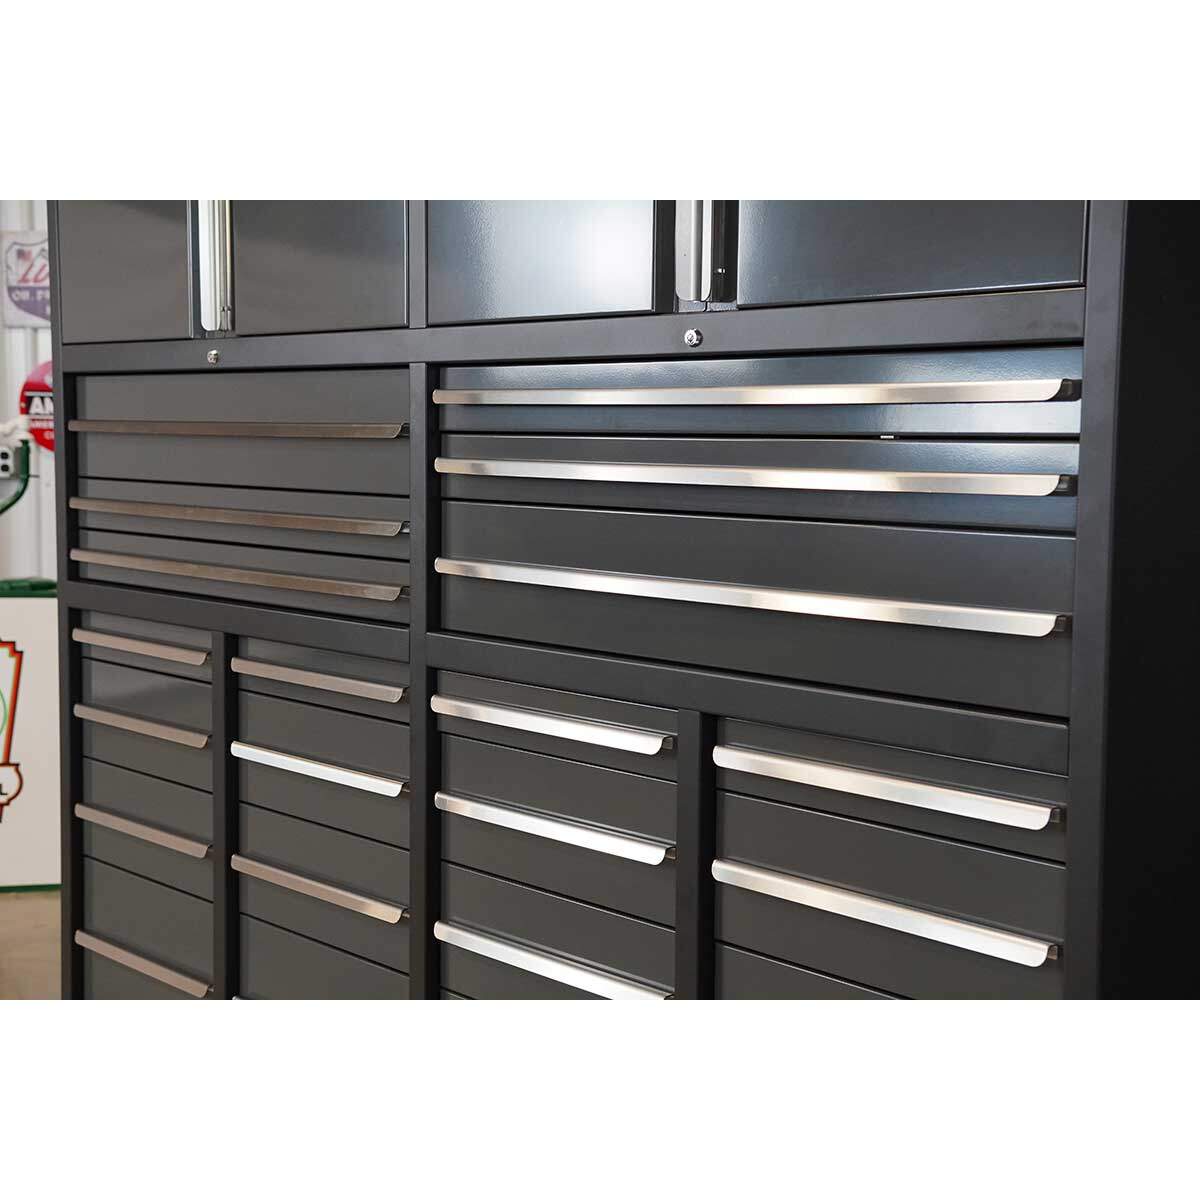 Dragonfire Tools 22-Drawer 7-Foot Roll-Around Tool Cabinet with Swappable Drawers